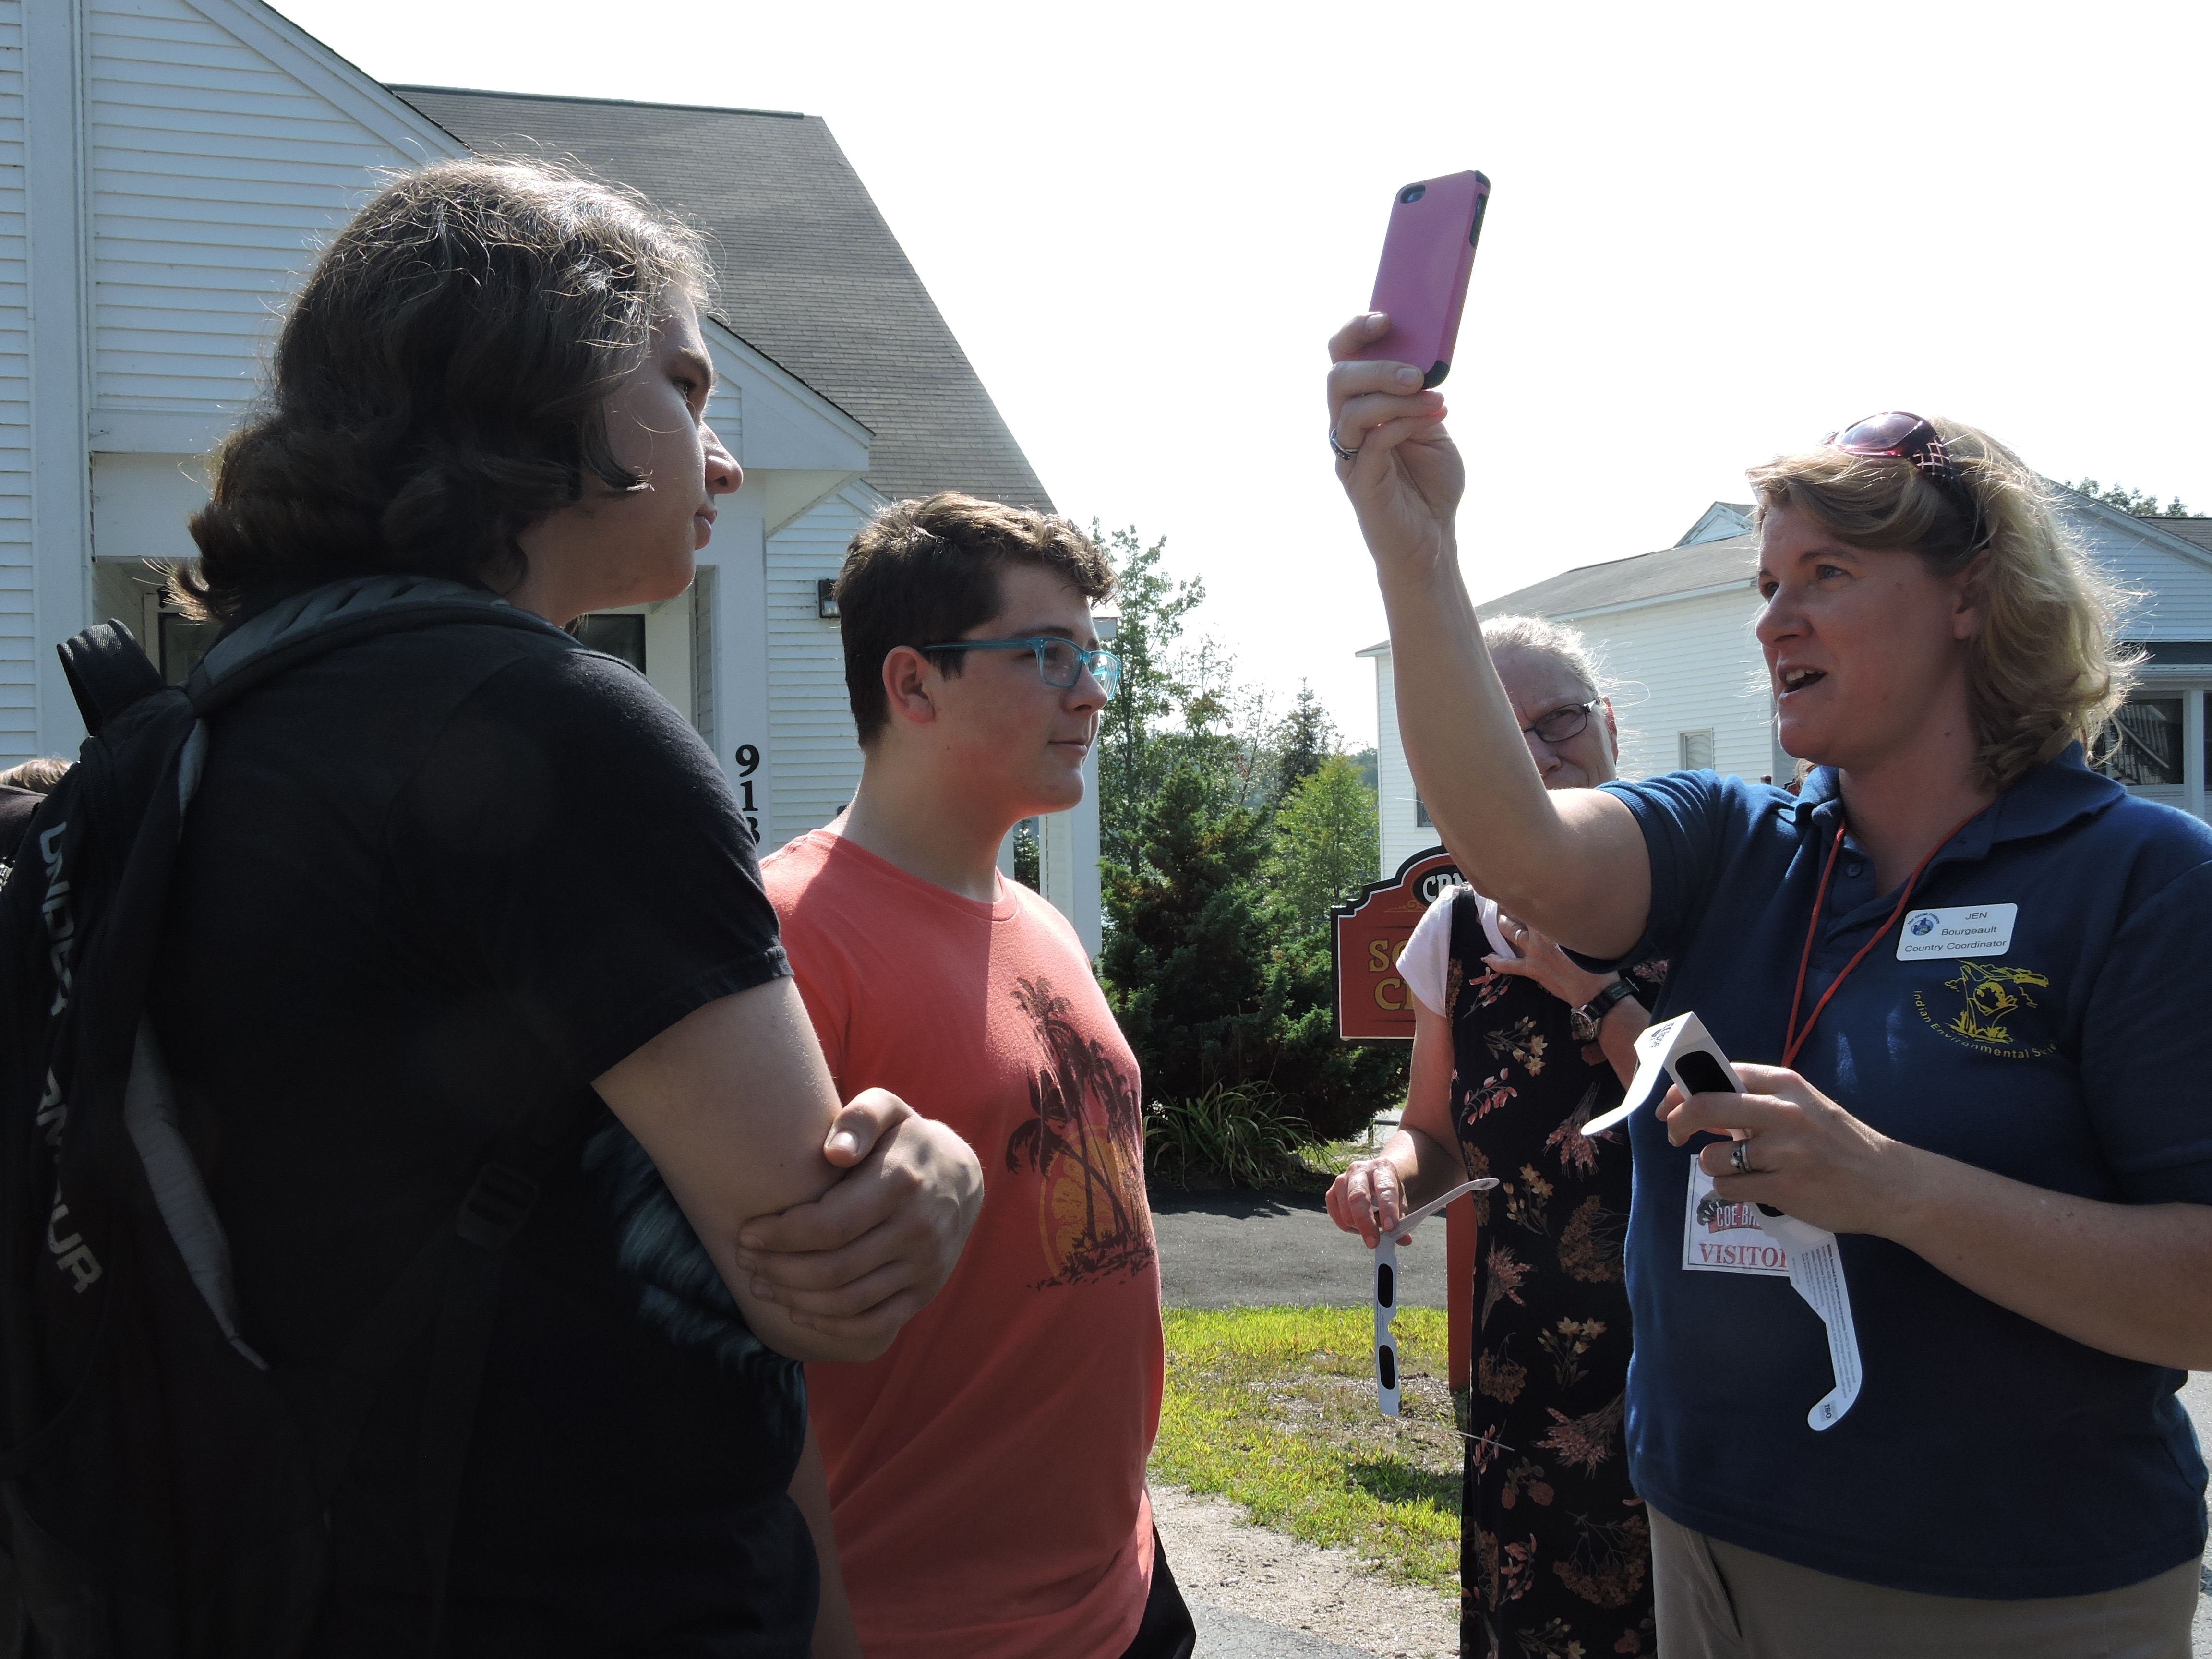 bourgeault with observer app and eclipse glasses in hand explaining to two young male students and one adult female how to take the pictures with the app